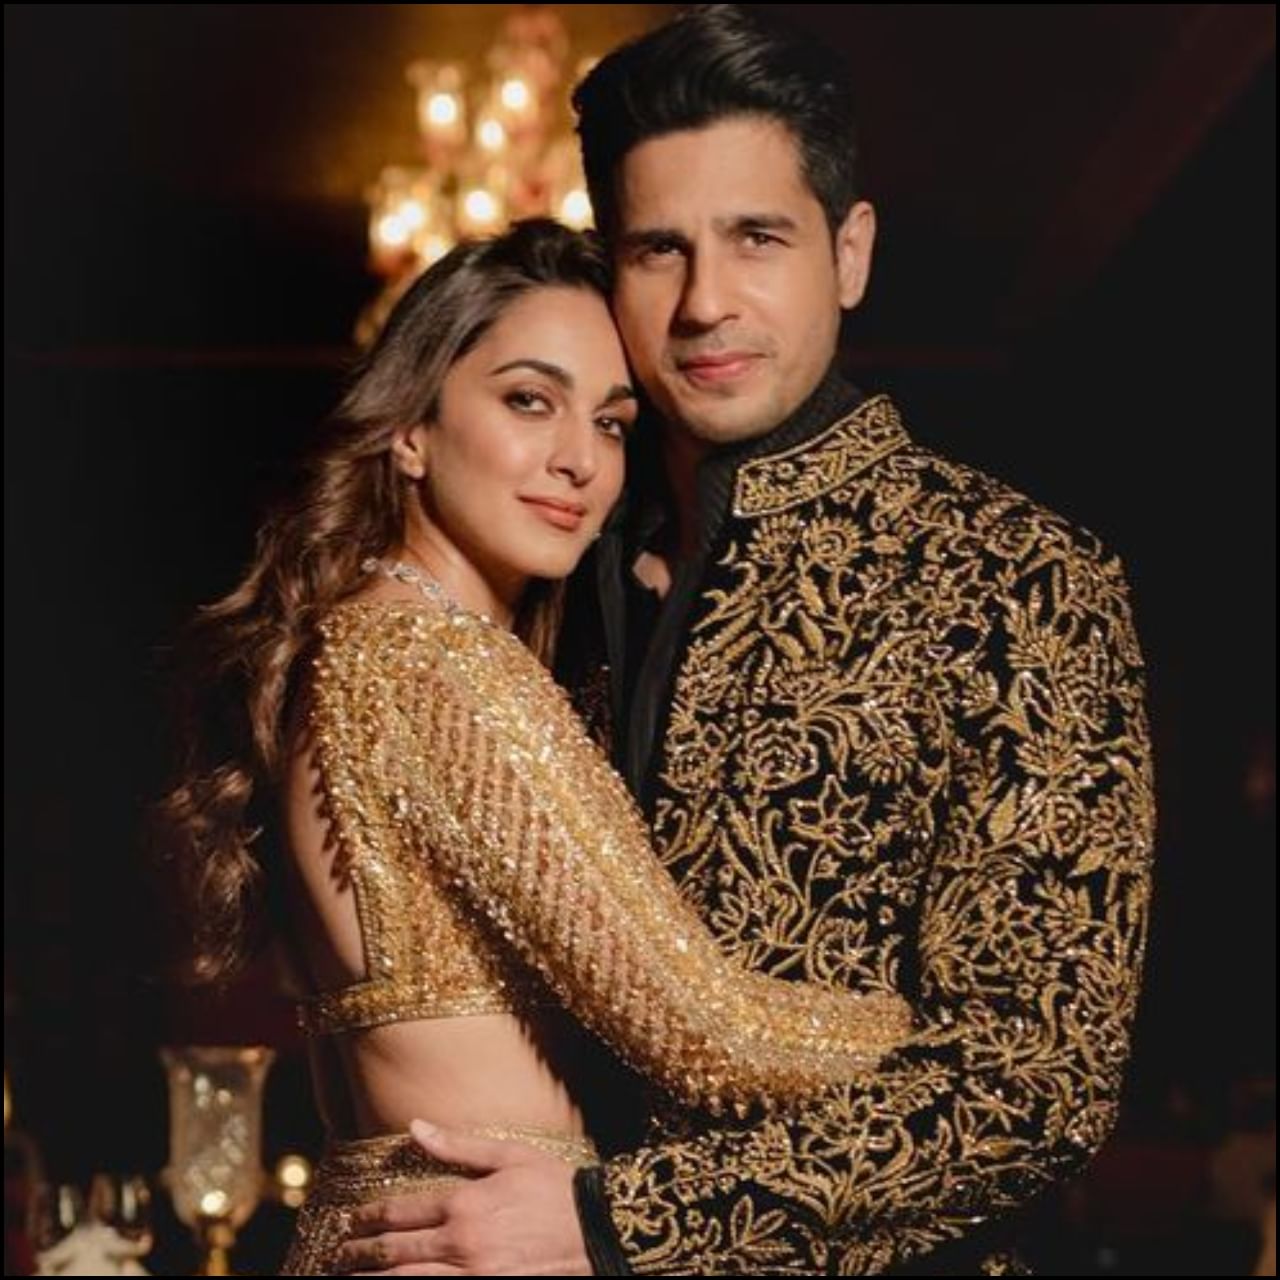 In Sid-Kiara's sangeet ceremony, her royal outfits have once again attracted everyone's attention. The dress of both has been designed by designer Manish Malhotra. Kiara is wearing a golden lehenga while Siddharth is wearing a studded black sherwani.